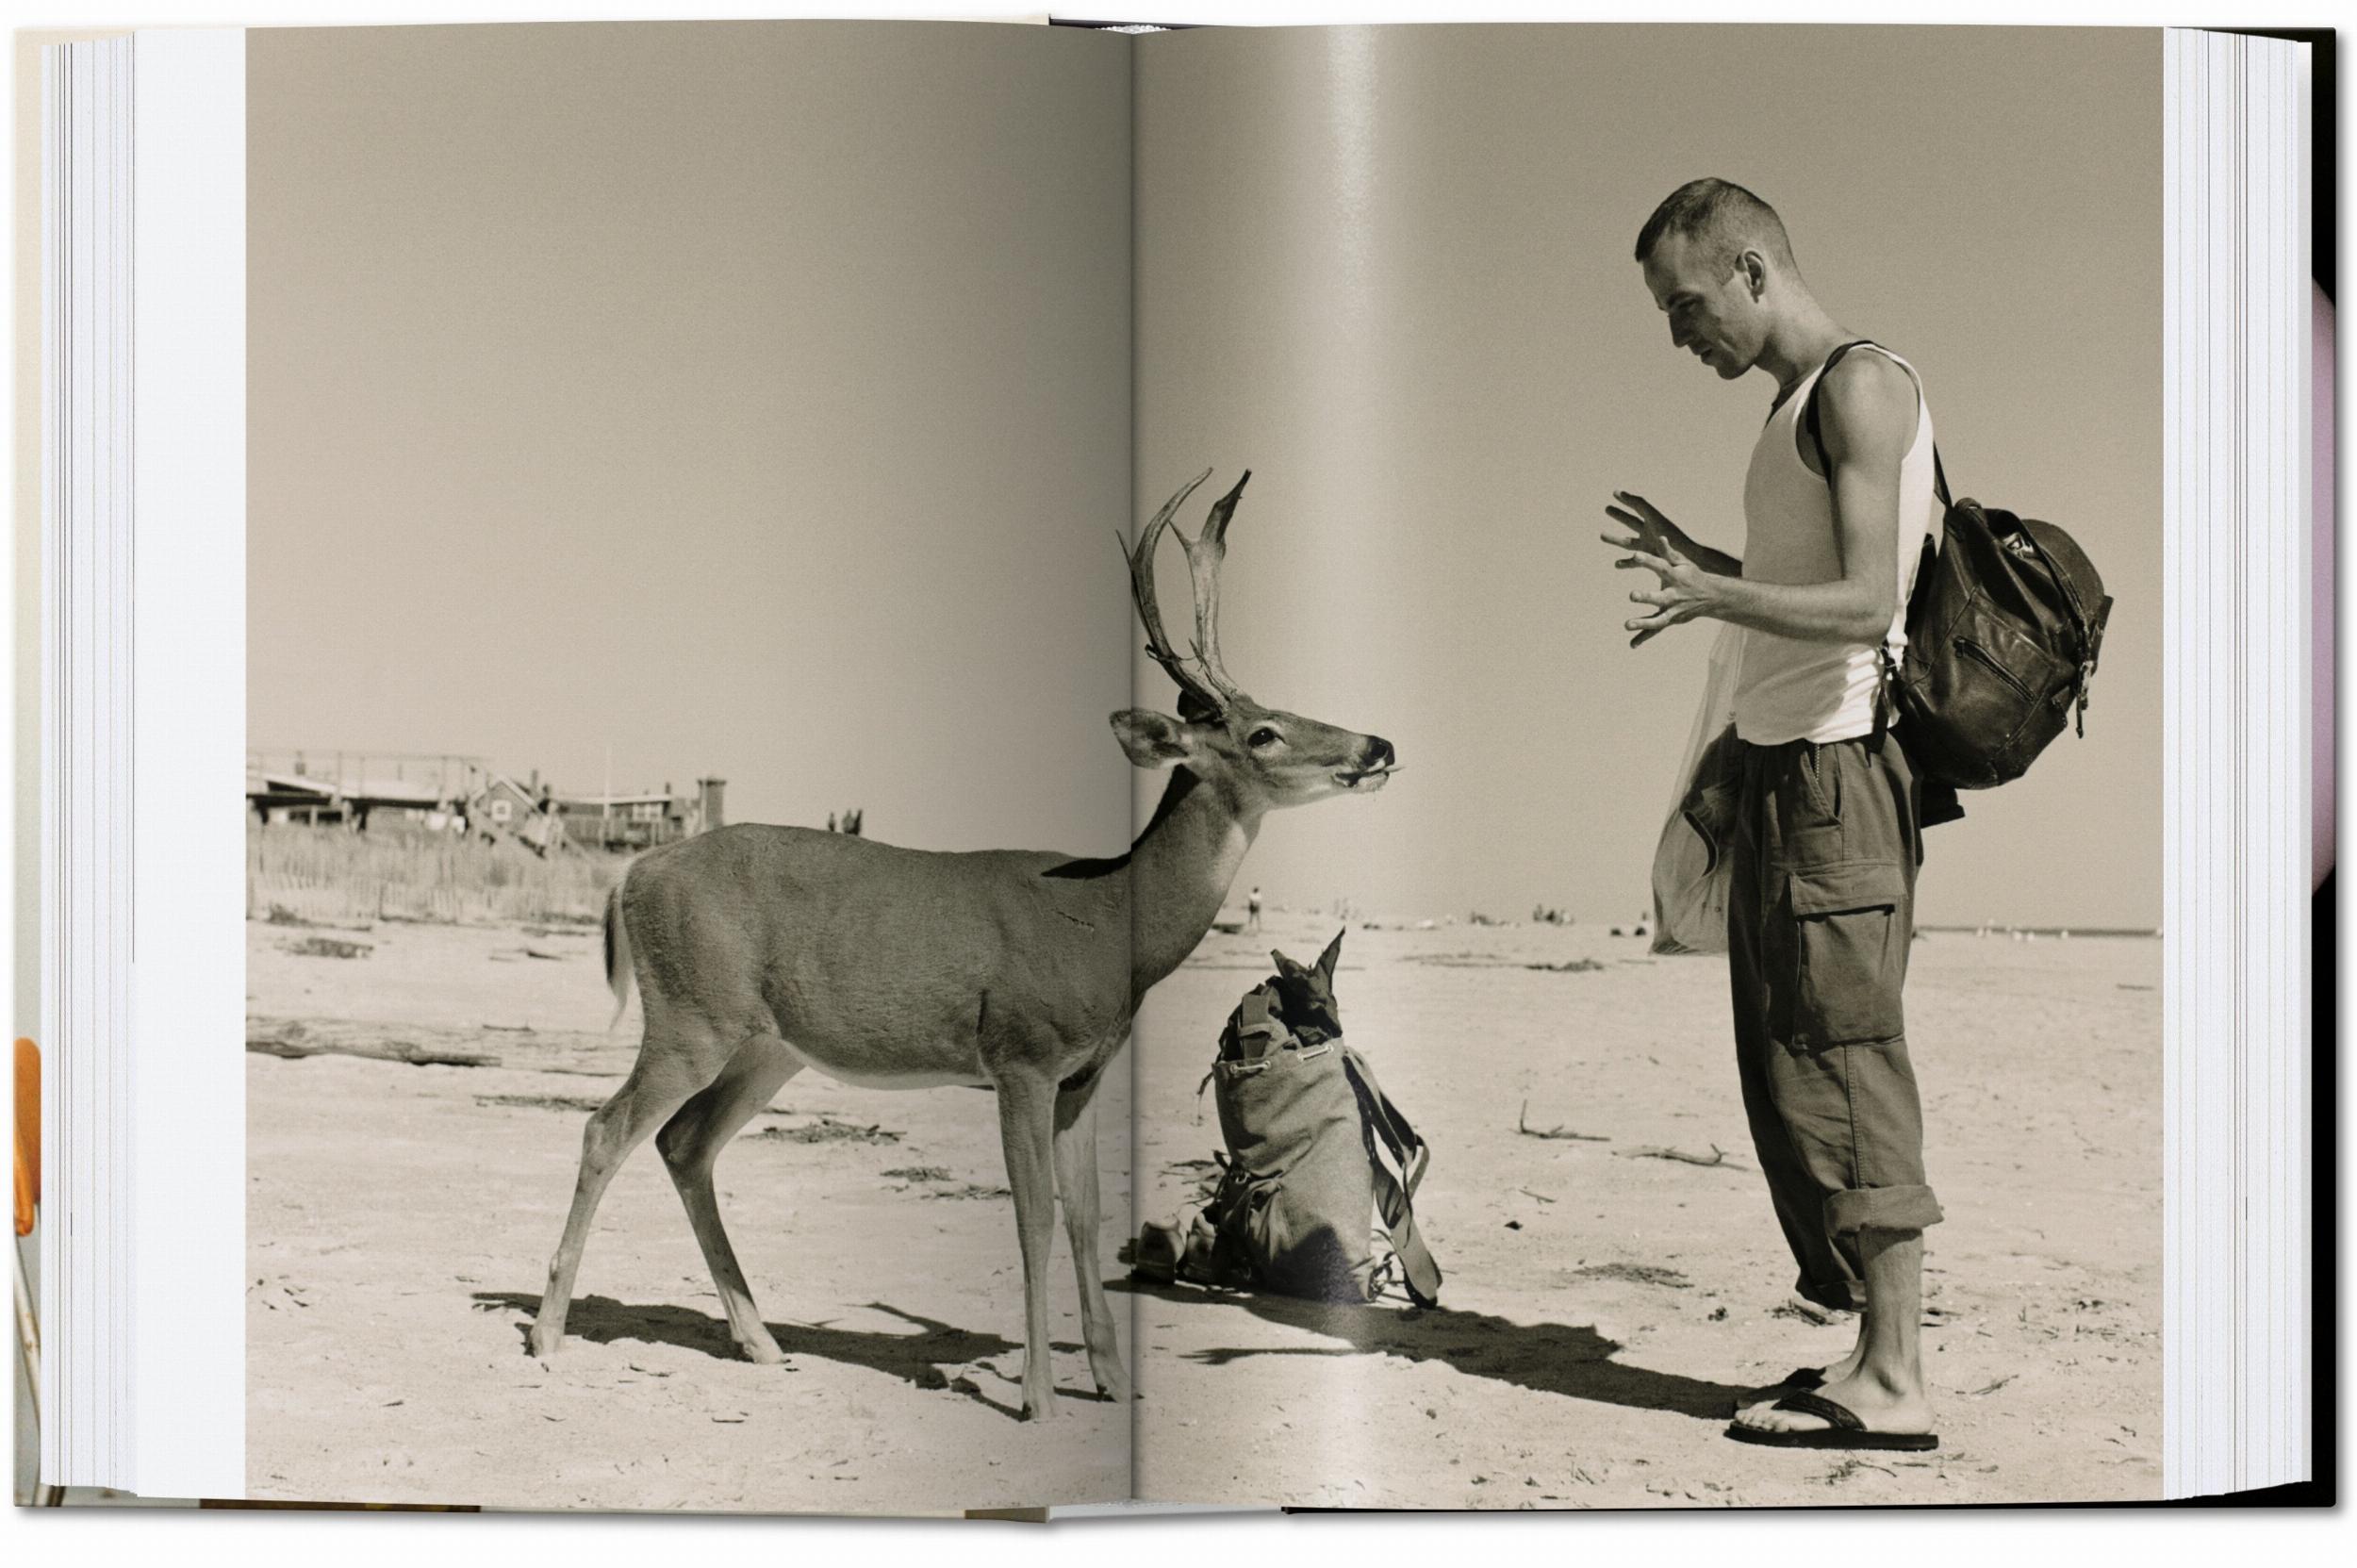 Wolfgang Tillmans - The Complete Works 40 series